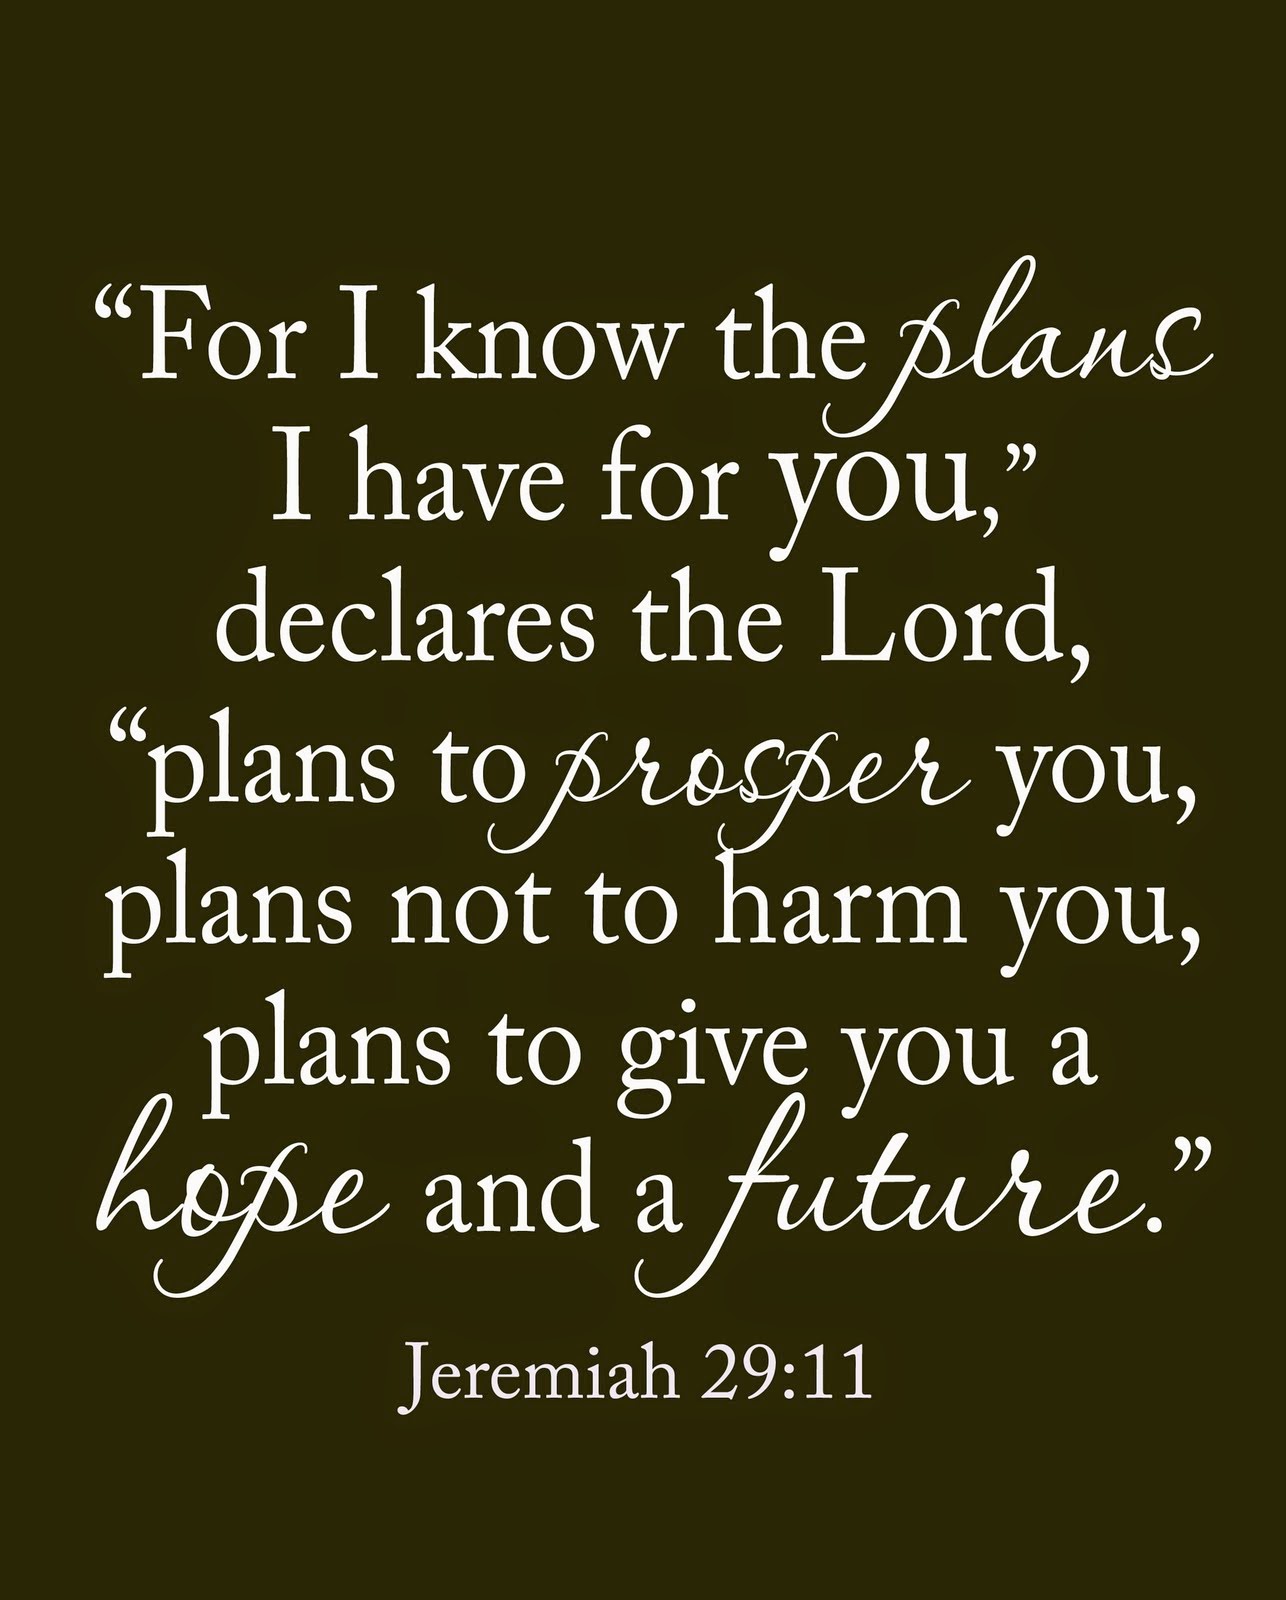 Haystack Bible Commentary: Jer 29:11: “For I know the plans I have ...